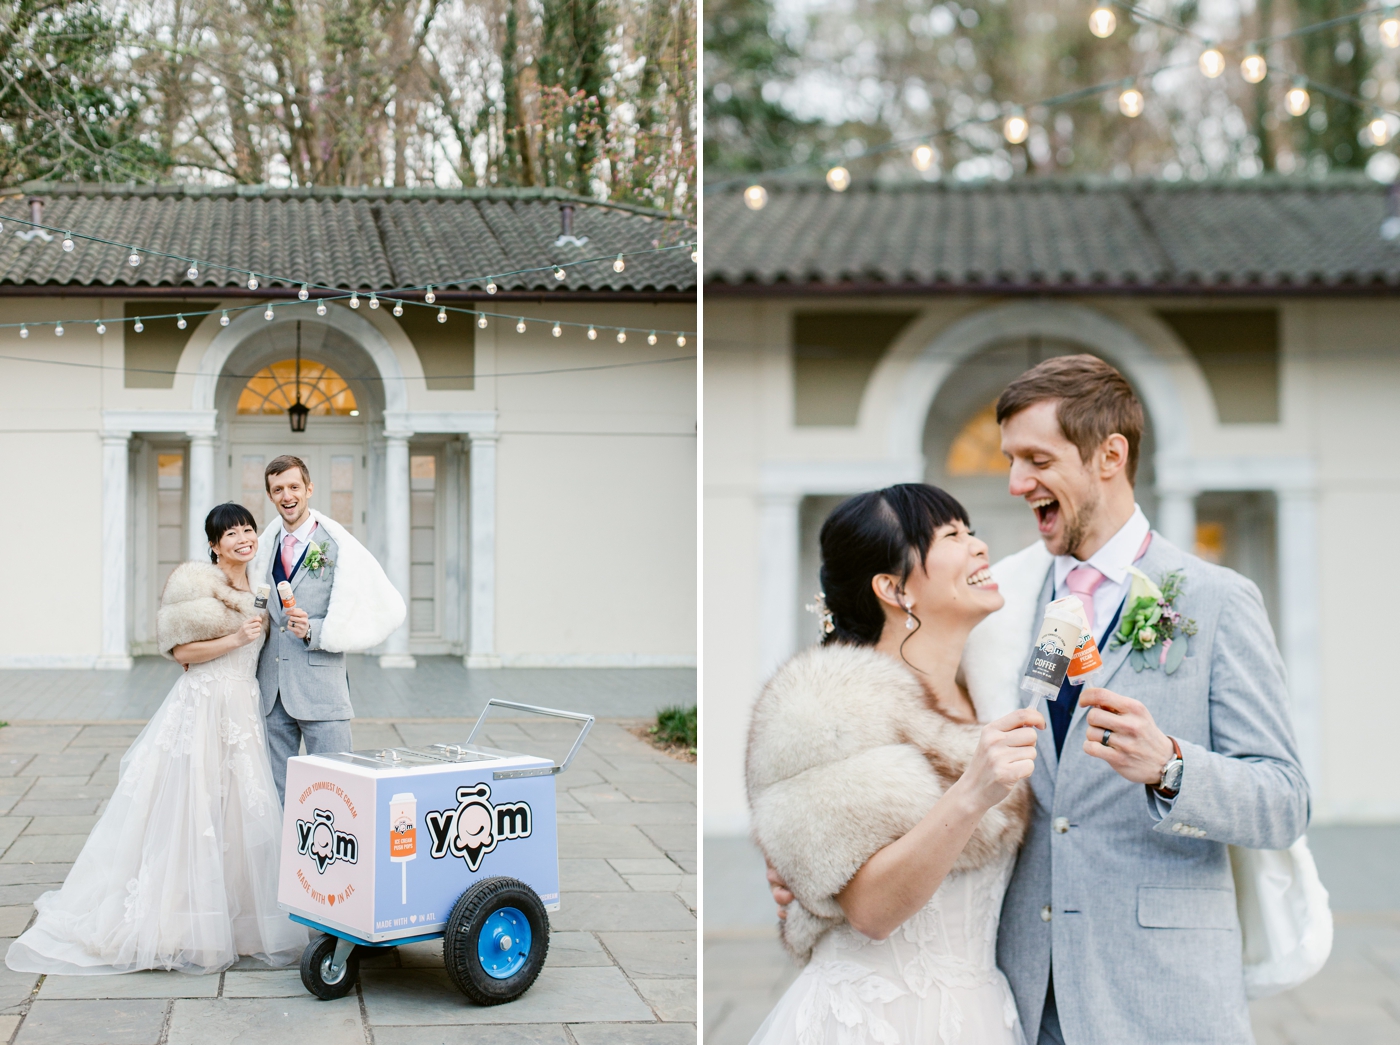 Bride and groom eating Yom ice cream at their wedding